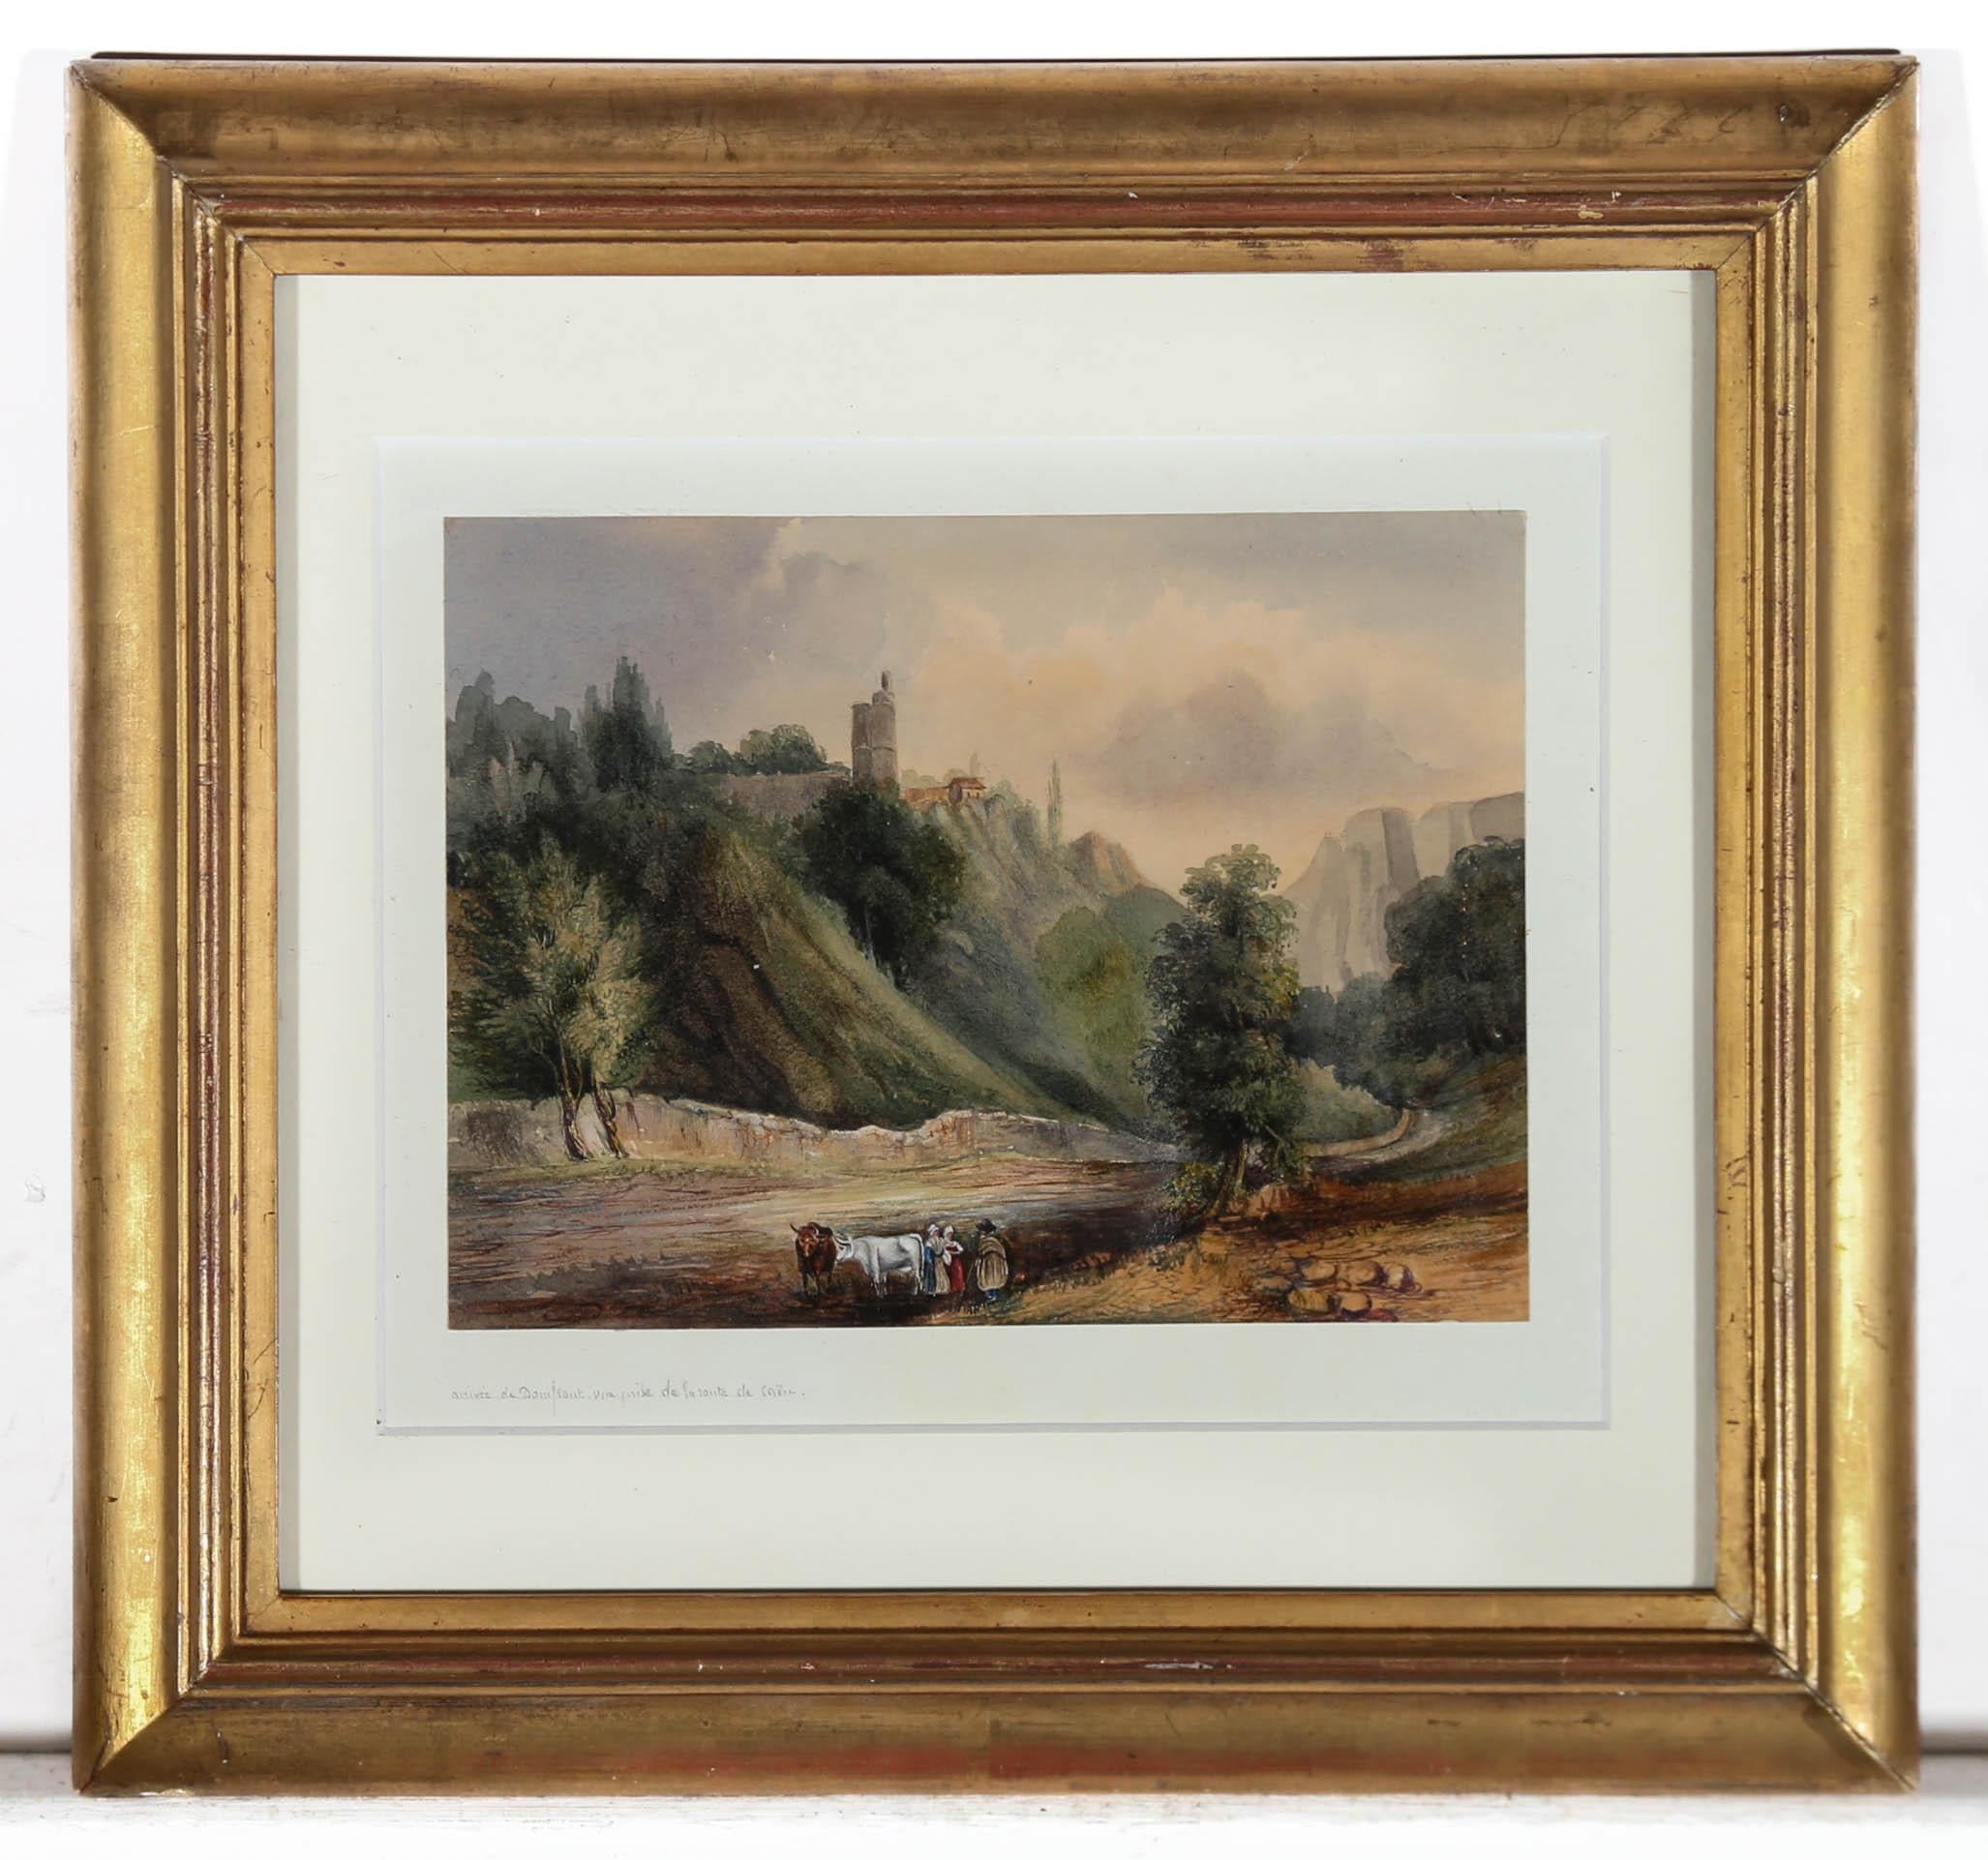 A charming watercolour scene depicting figures of the road to Château de Domfront which can be seen on a distant hill. The artist uses fine brushwork to create a detailed, intricate finish to the piece. Unsigned. Inscribed with a location in French